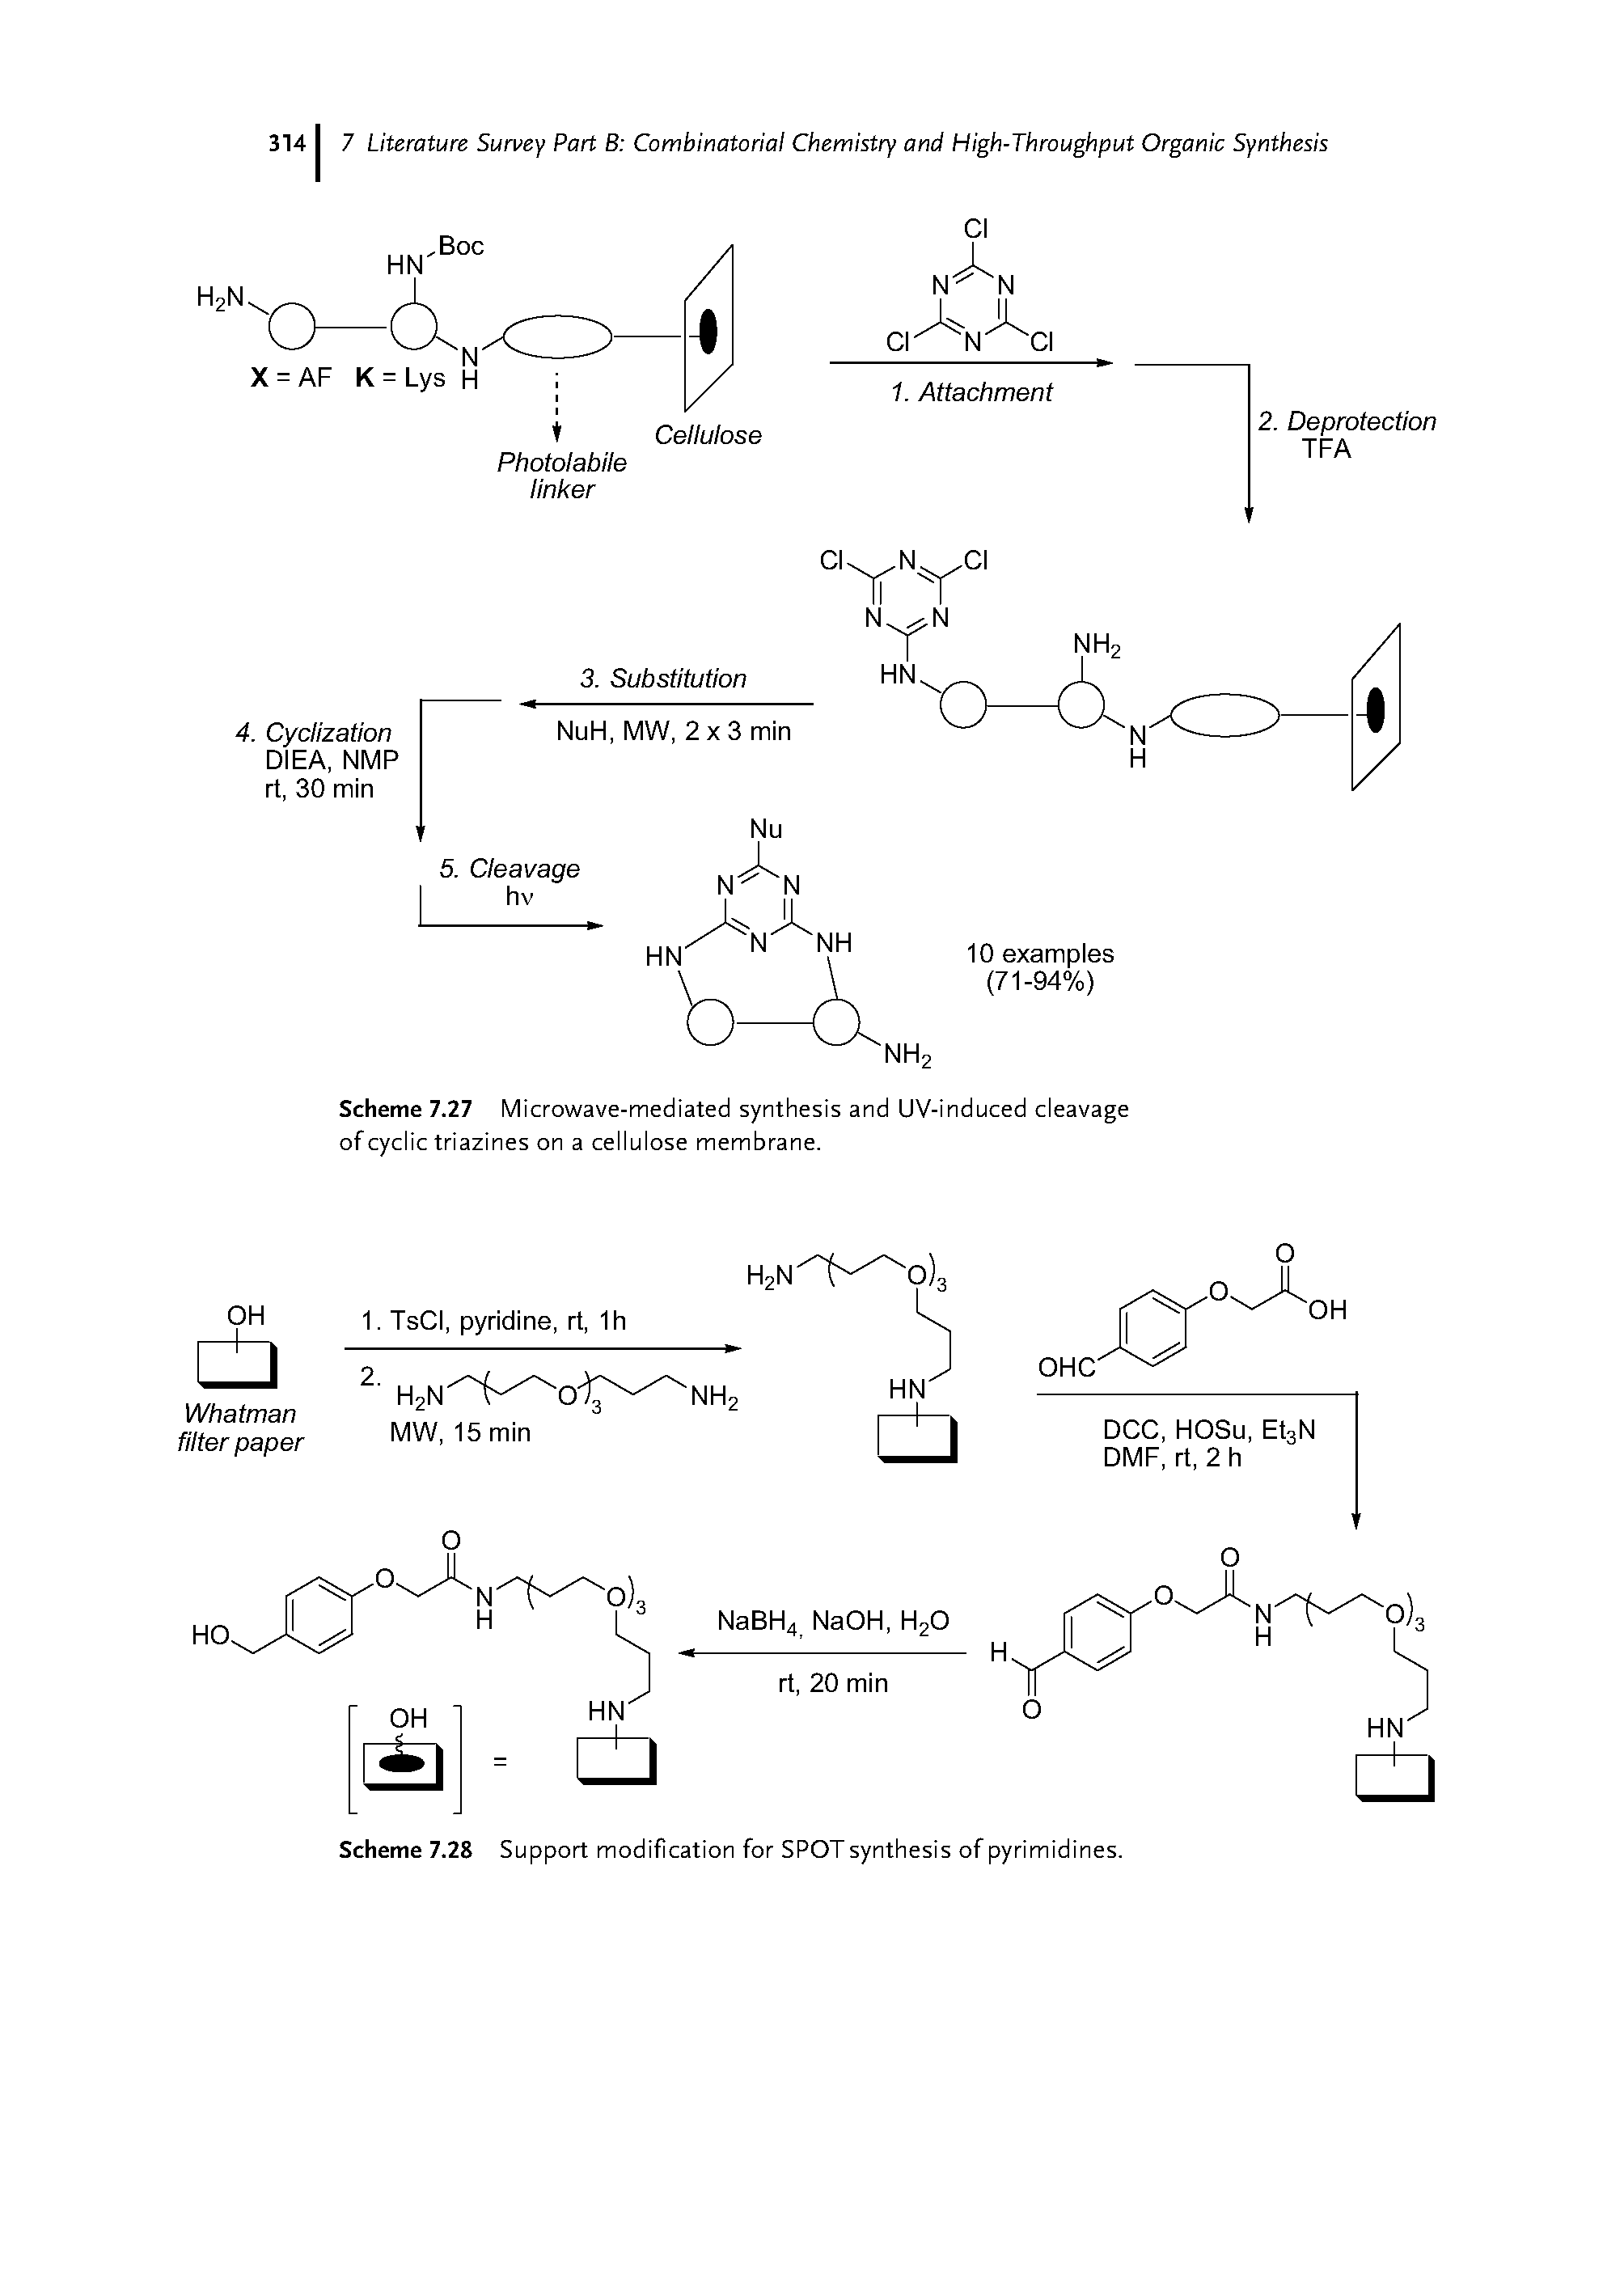 Scheme 7.27 Microwave-mediated synthesis and UV-induced cleavage of cyclic triazines on a cellulose membrane.